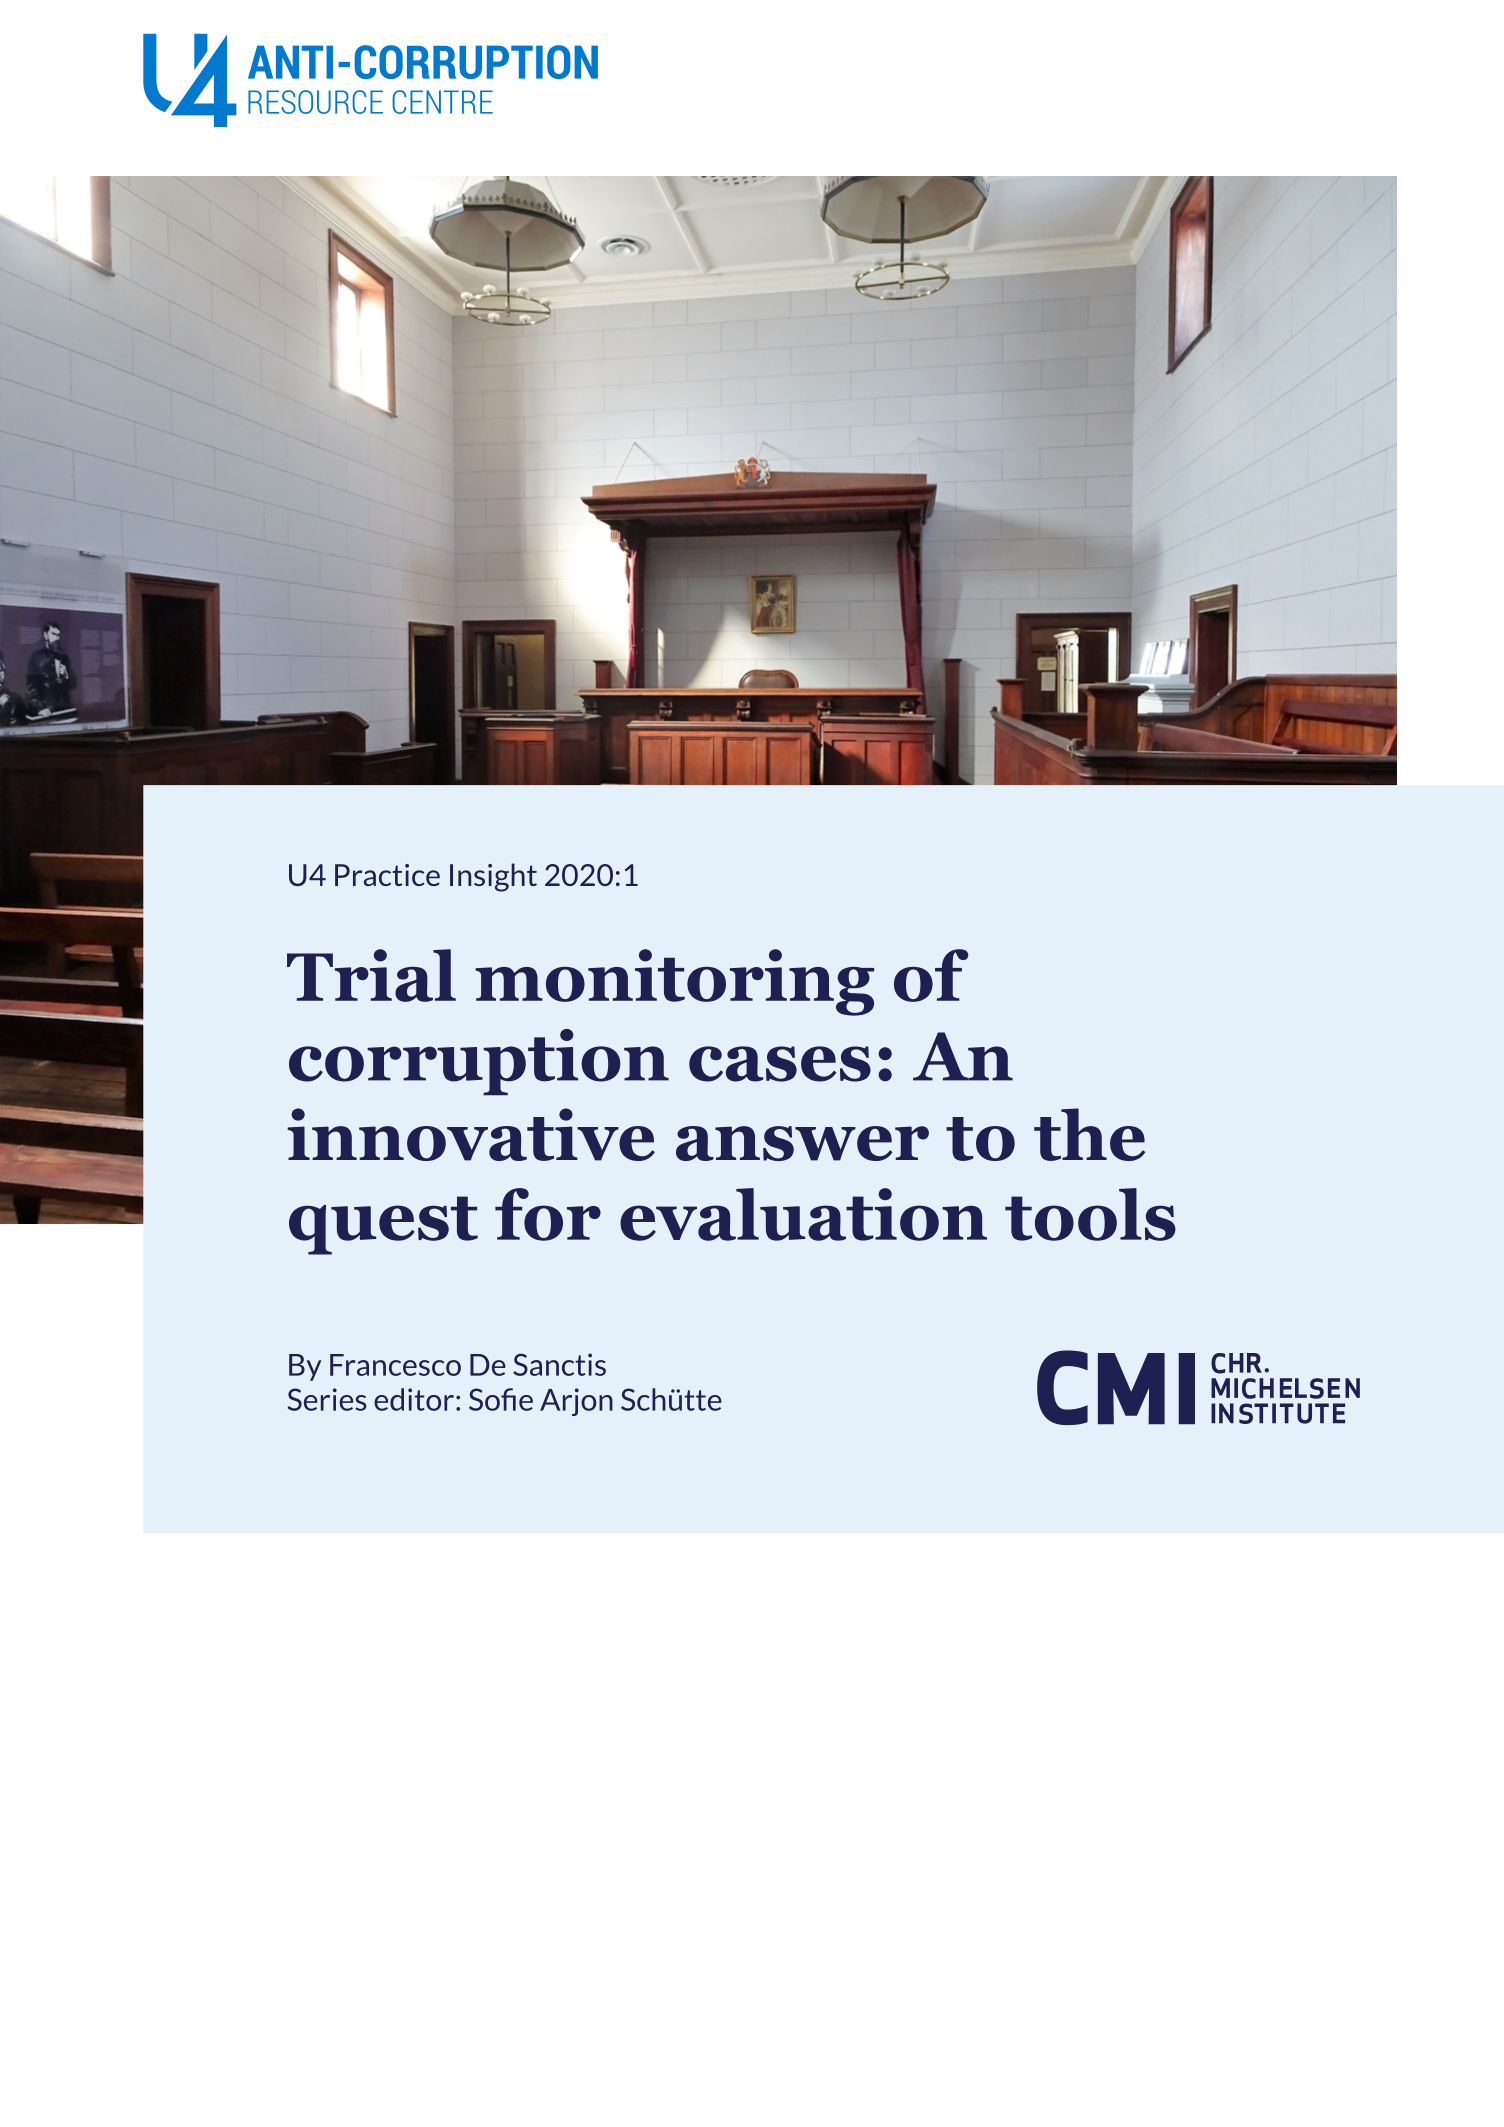 Trial monitoring of corruption cases: An innovative answer to the quest for evaluation tools